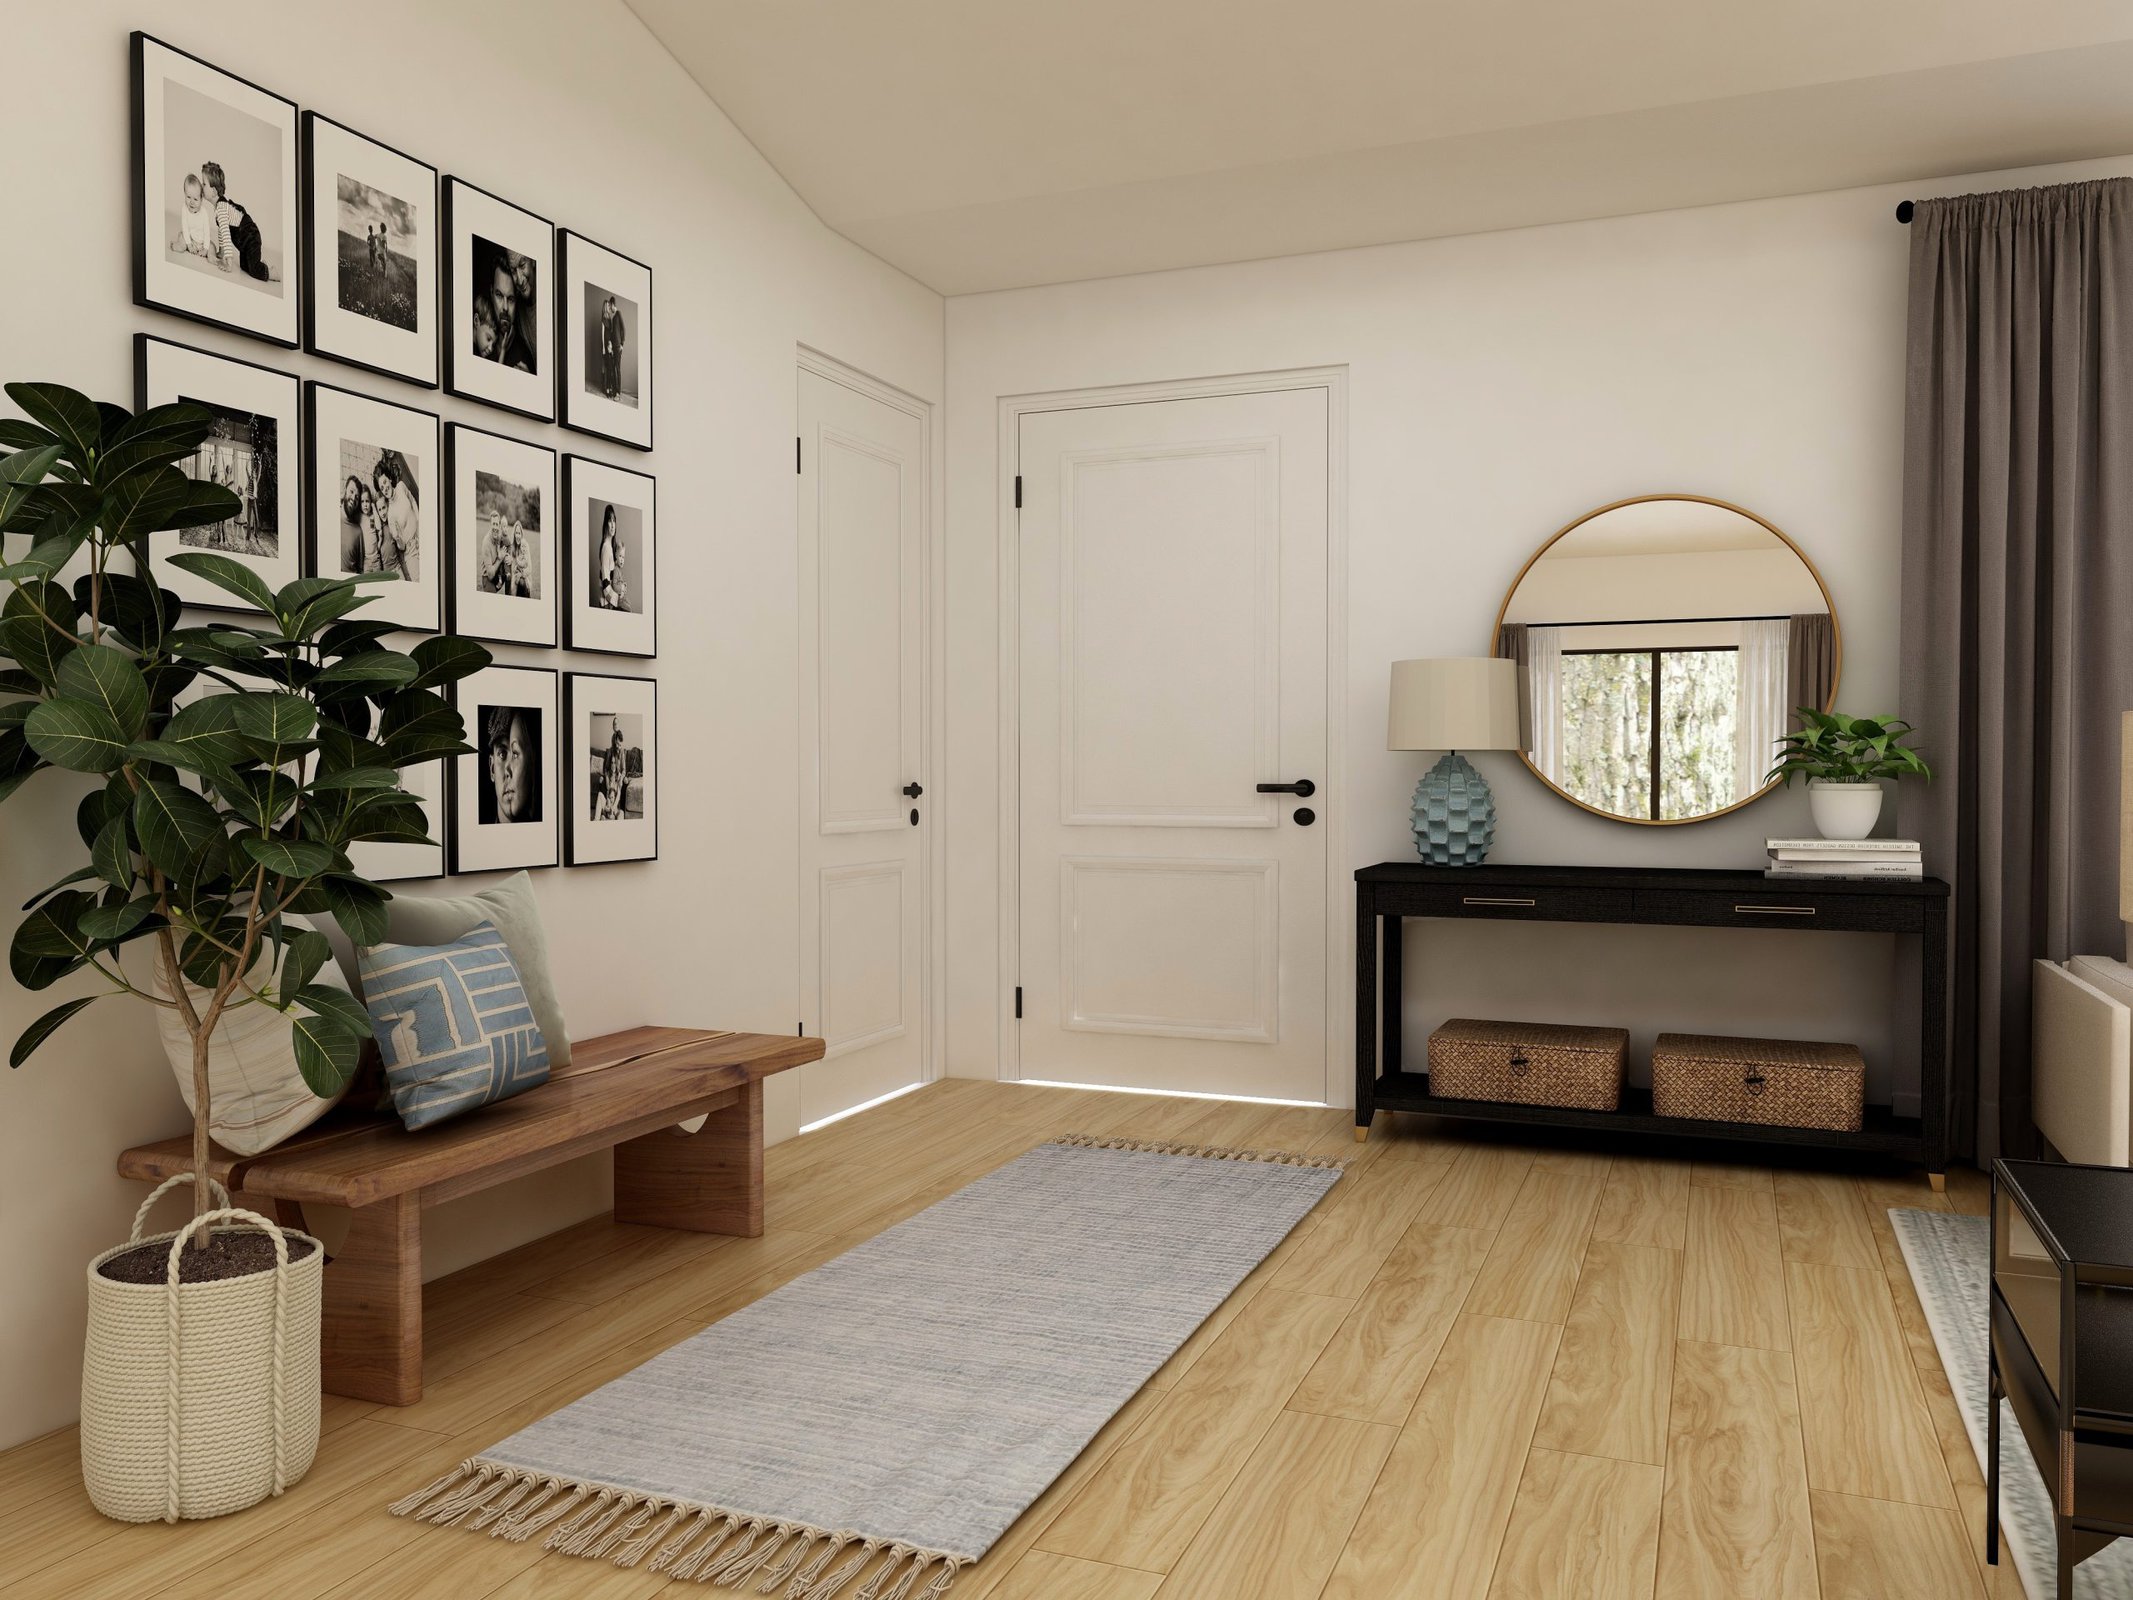  How Wide and Tall Should an Entryway Be to Fit a Bench scaled